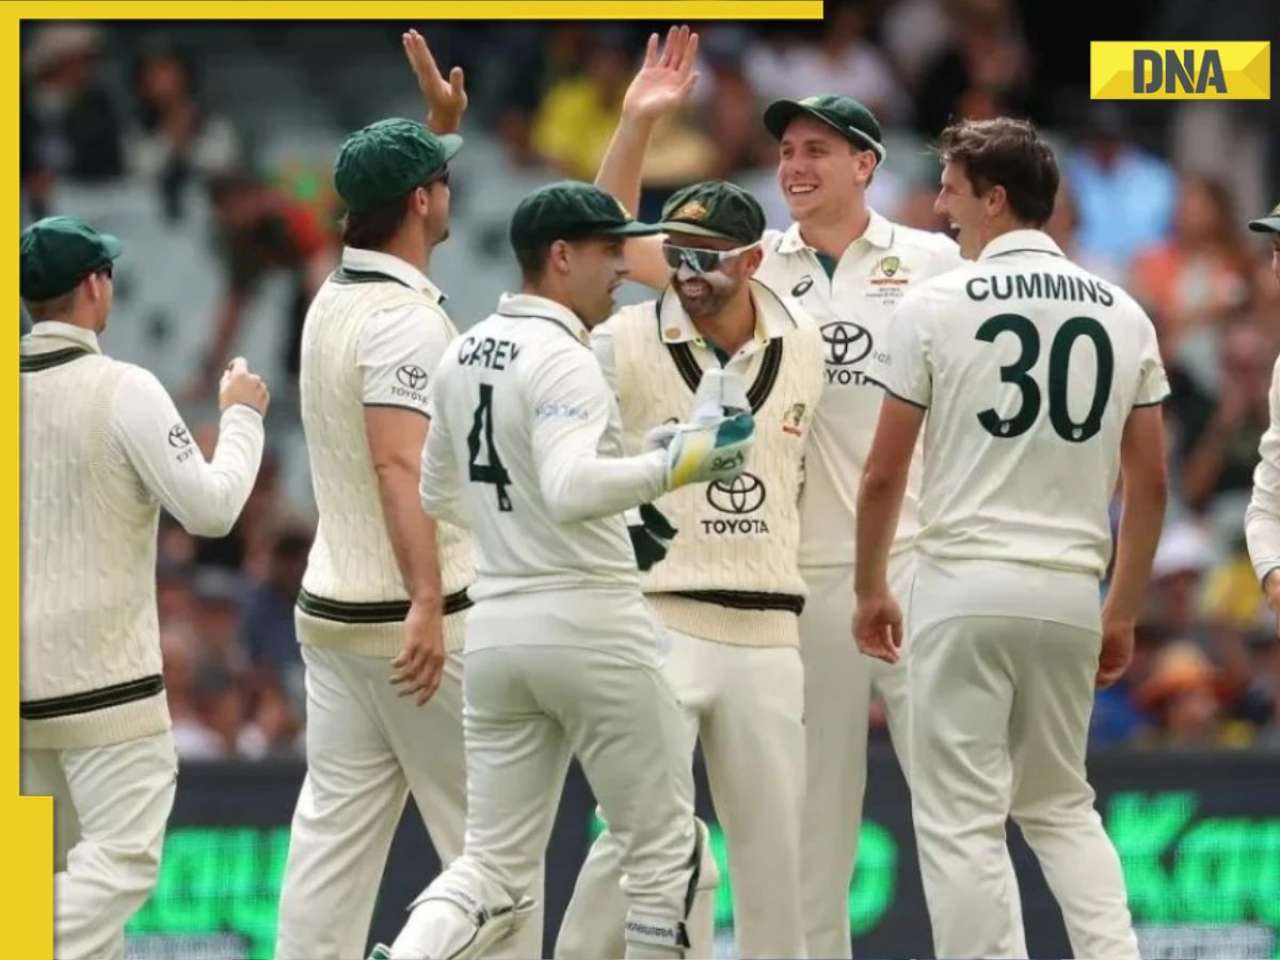 Australia dethrone India to become No. 1 ranked test team after annual rankings update